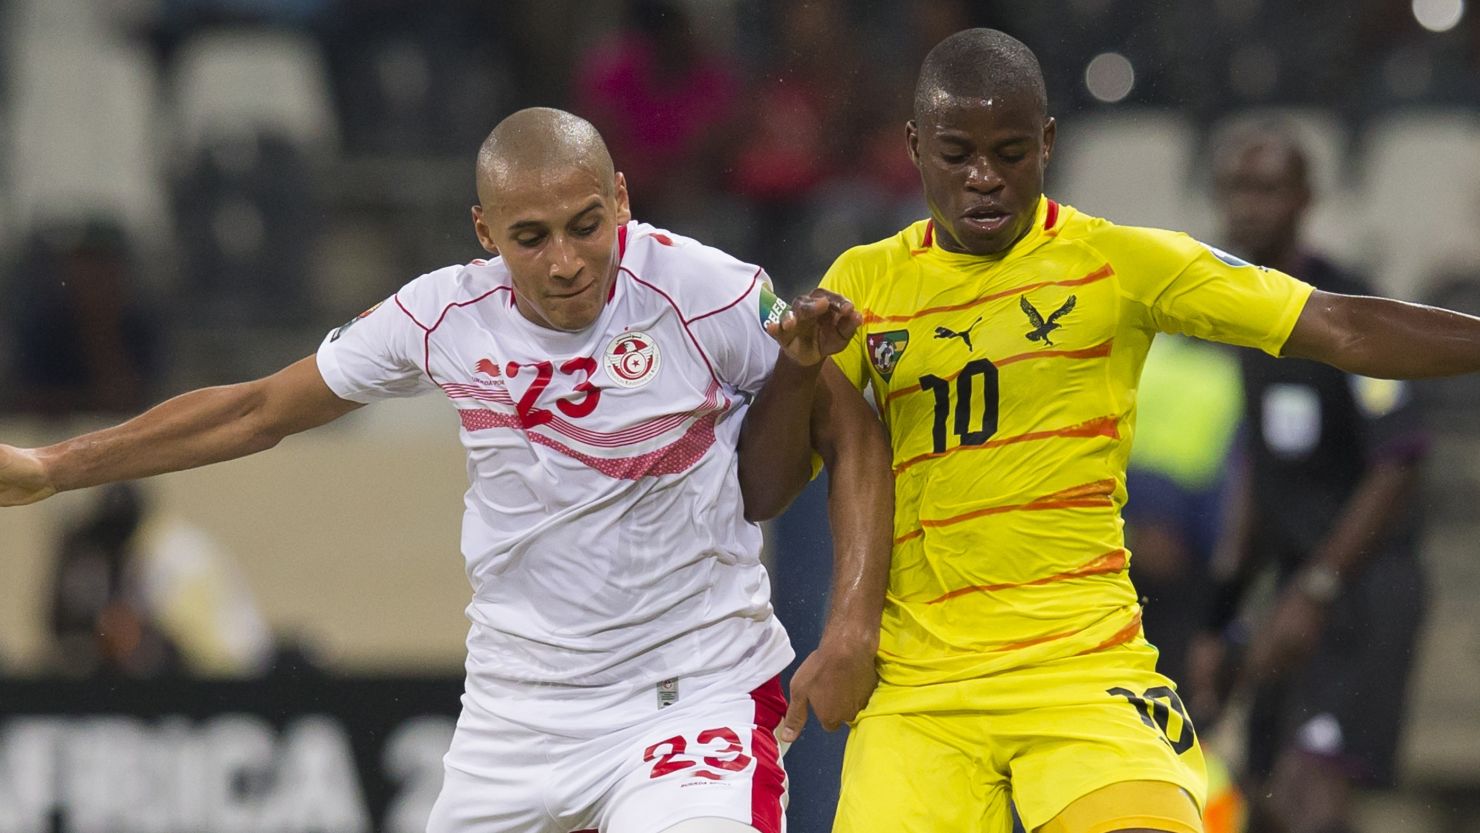 Wahbi Khazri of Tunisia and Floyd Ama Ayite of Togo do battle during the Africa Cup of Nations clash in Nelspruit.